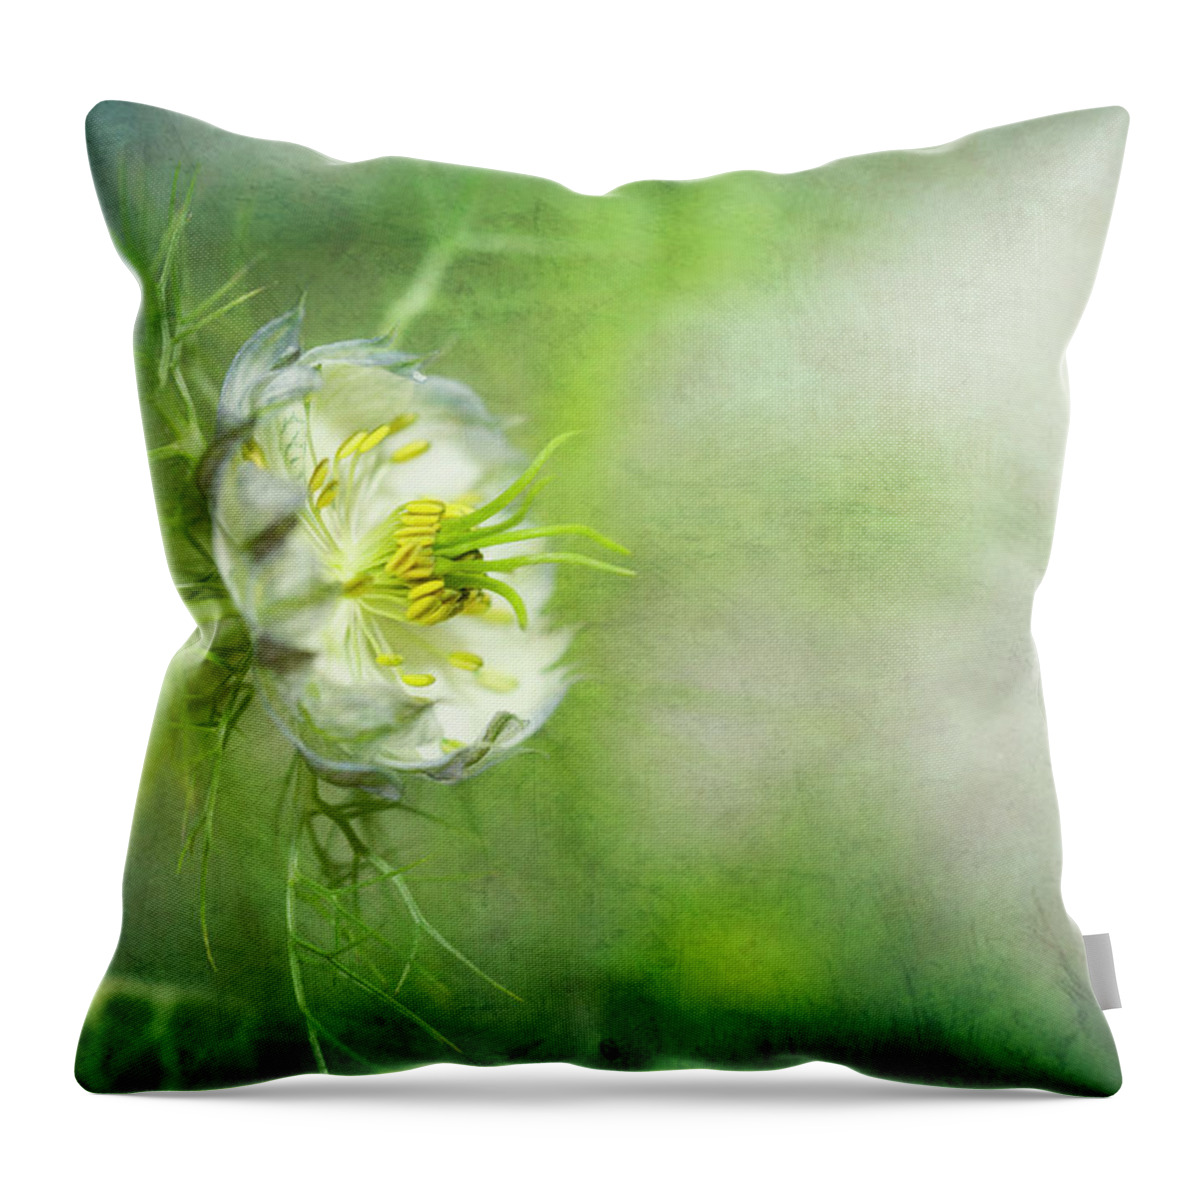 California Throw Pillow featuring the photograph Love-in-a-mist, Nigella Flower by Susangaryphotography